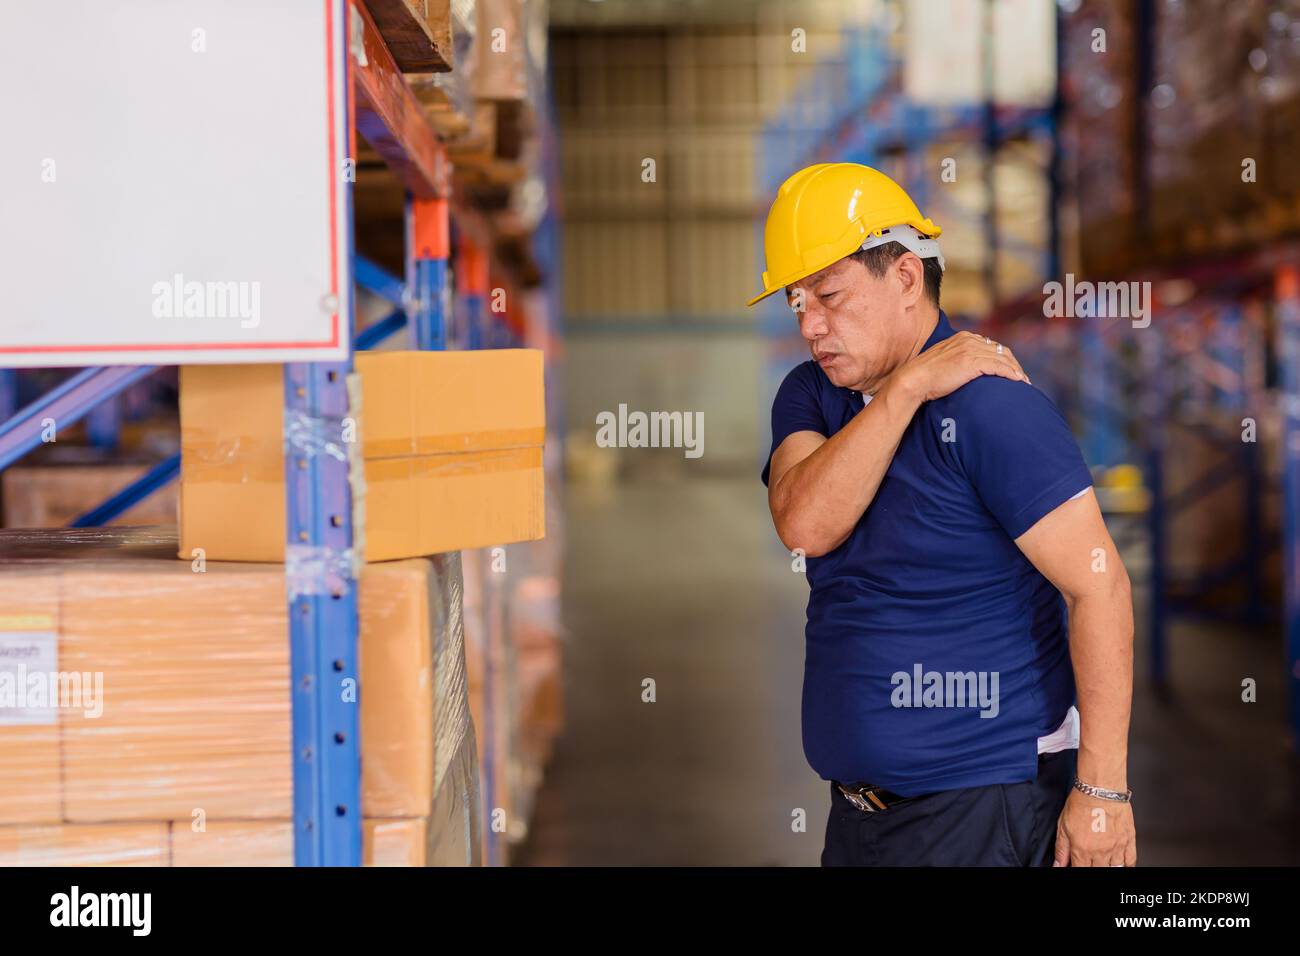 warehouse worker back shoulder muscle pain injuries from heavy lifting hard working. Stock Photo